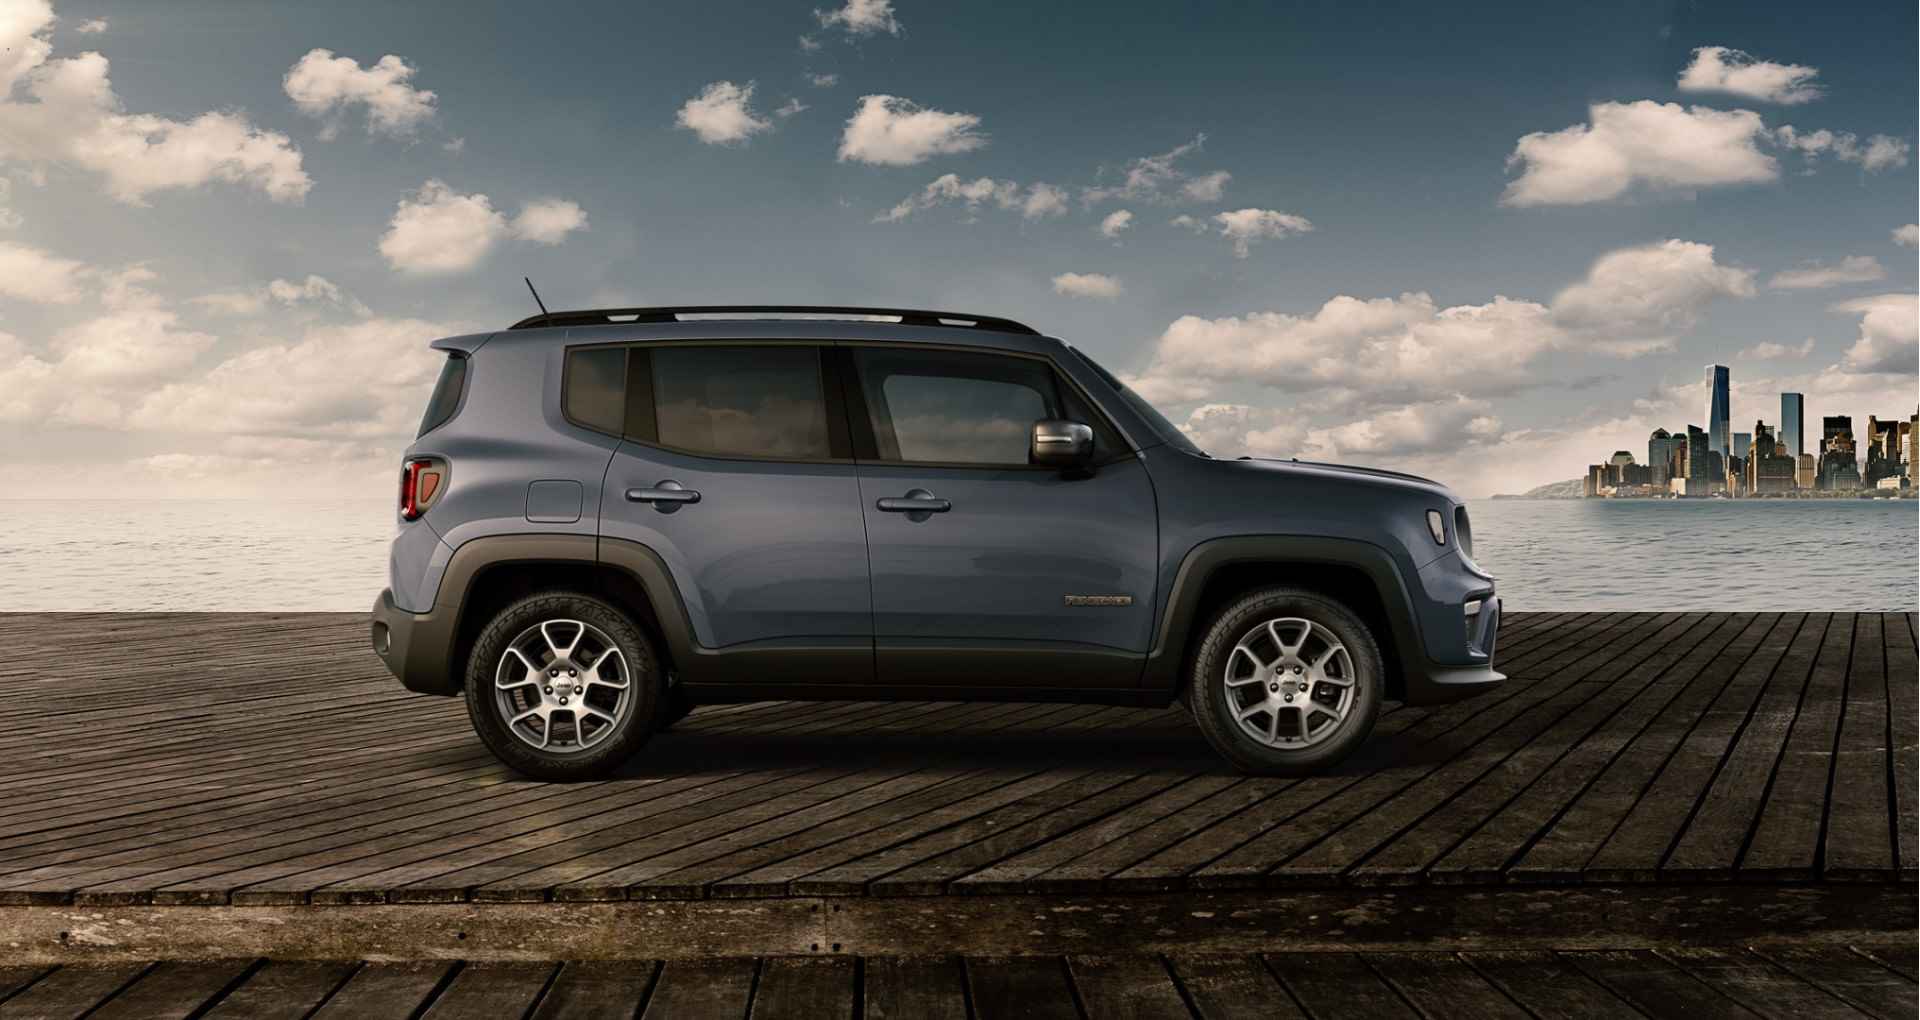 Jeep Renegade 1.5T 130 pk Automaat e-Hybrid Limited | Registratiekorting  €5.143 | Convenience Pack | Style Pack |  Visibility Pack | Uconnect™ LIVE-infotainmentsysteem met 8,4-inch Touchscreen, Navigatie en Bluetooth - 4/9